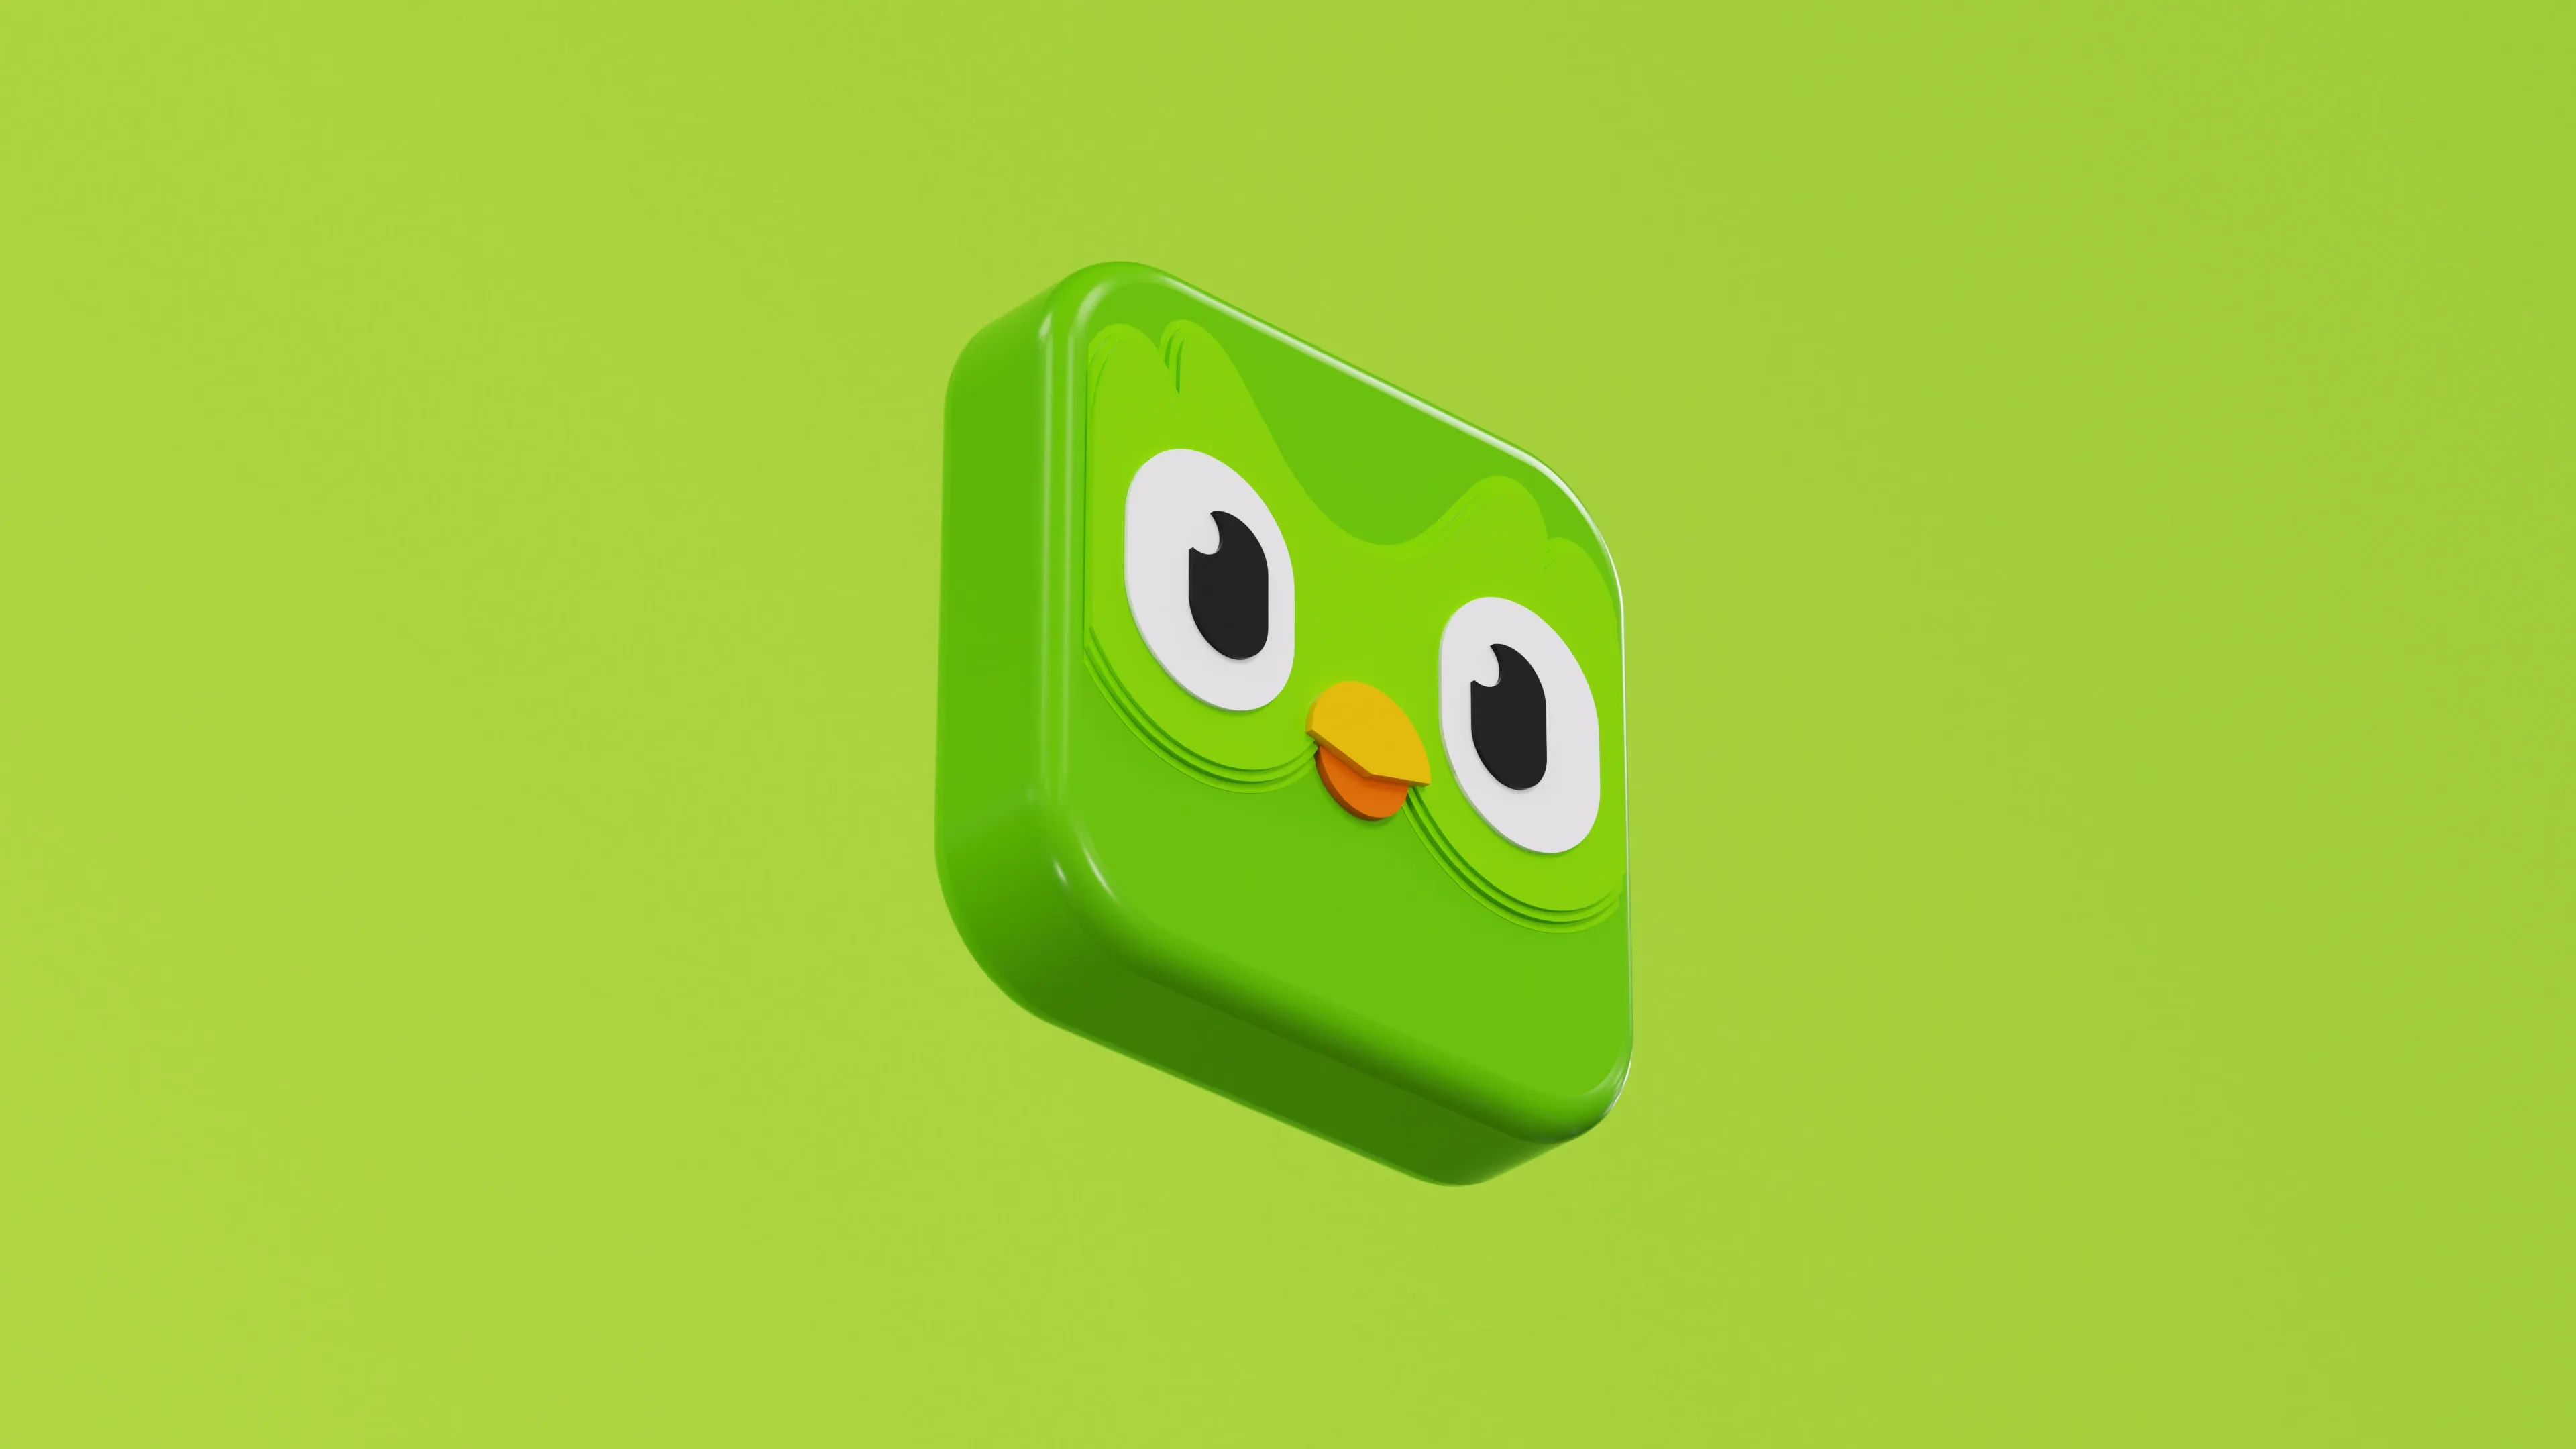 Green app icon for a learning language app Duolingo